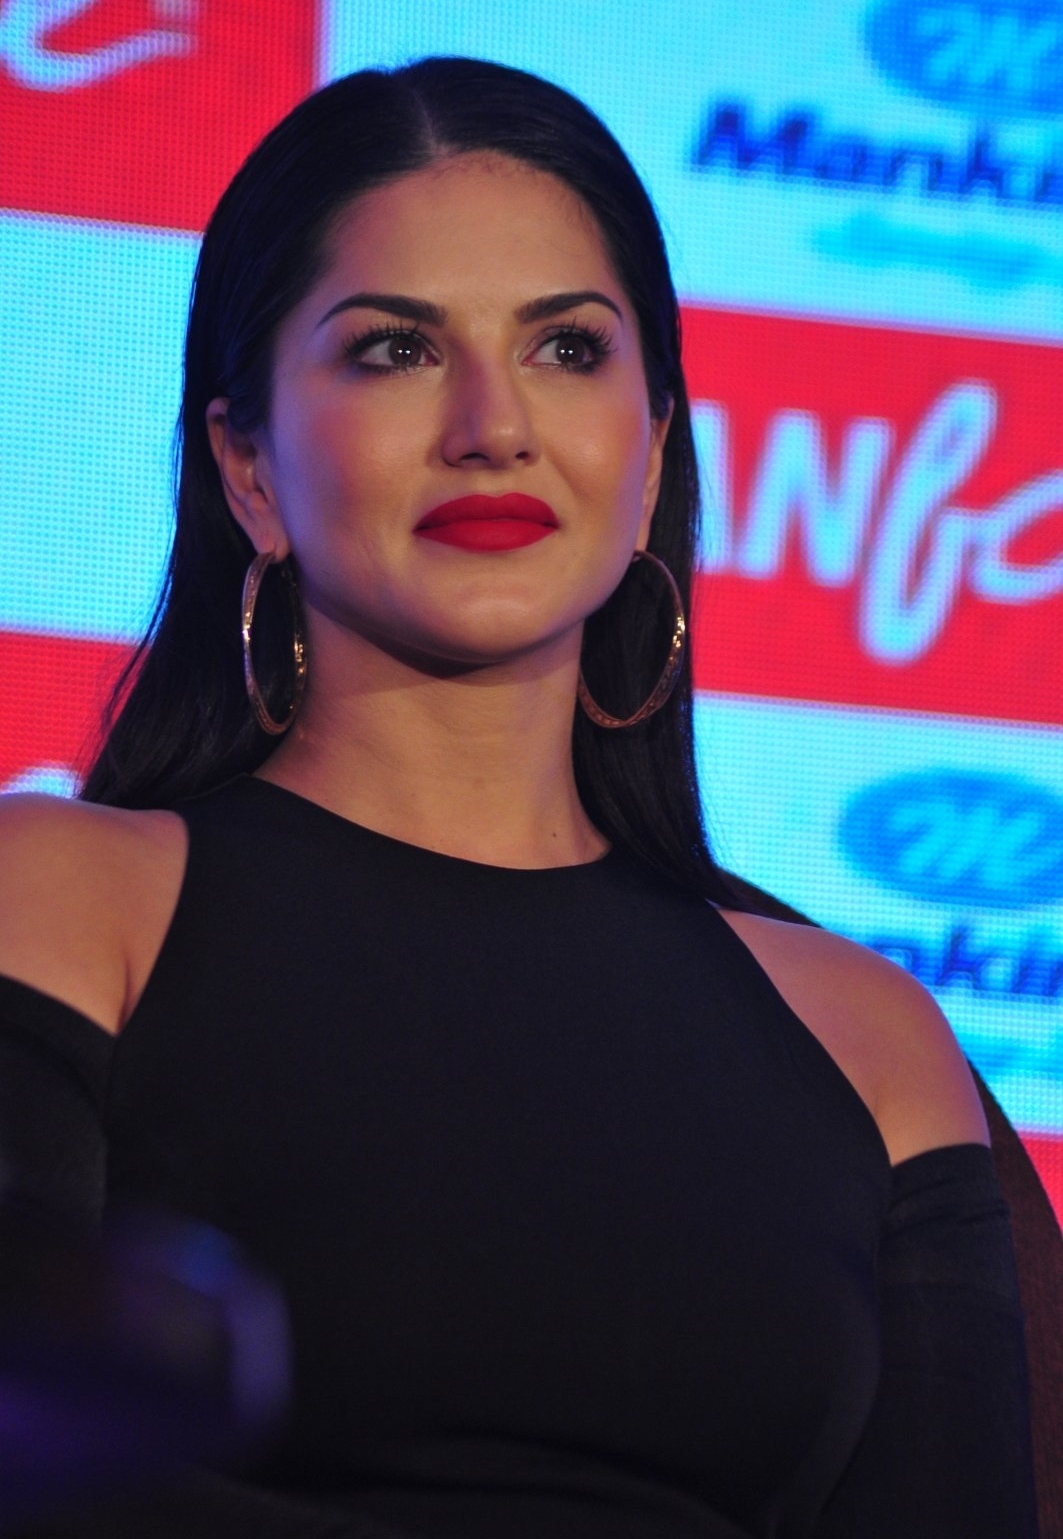 Sunny Leone Showcasing Her Sexy Curves in a Black Figure Hugging Dress At The Manforce Calendar Launch Event in Mumbai